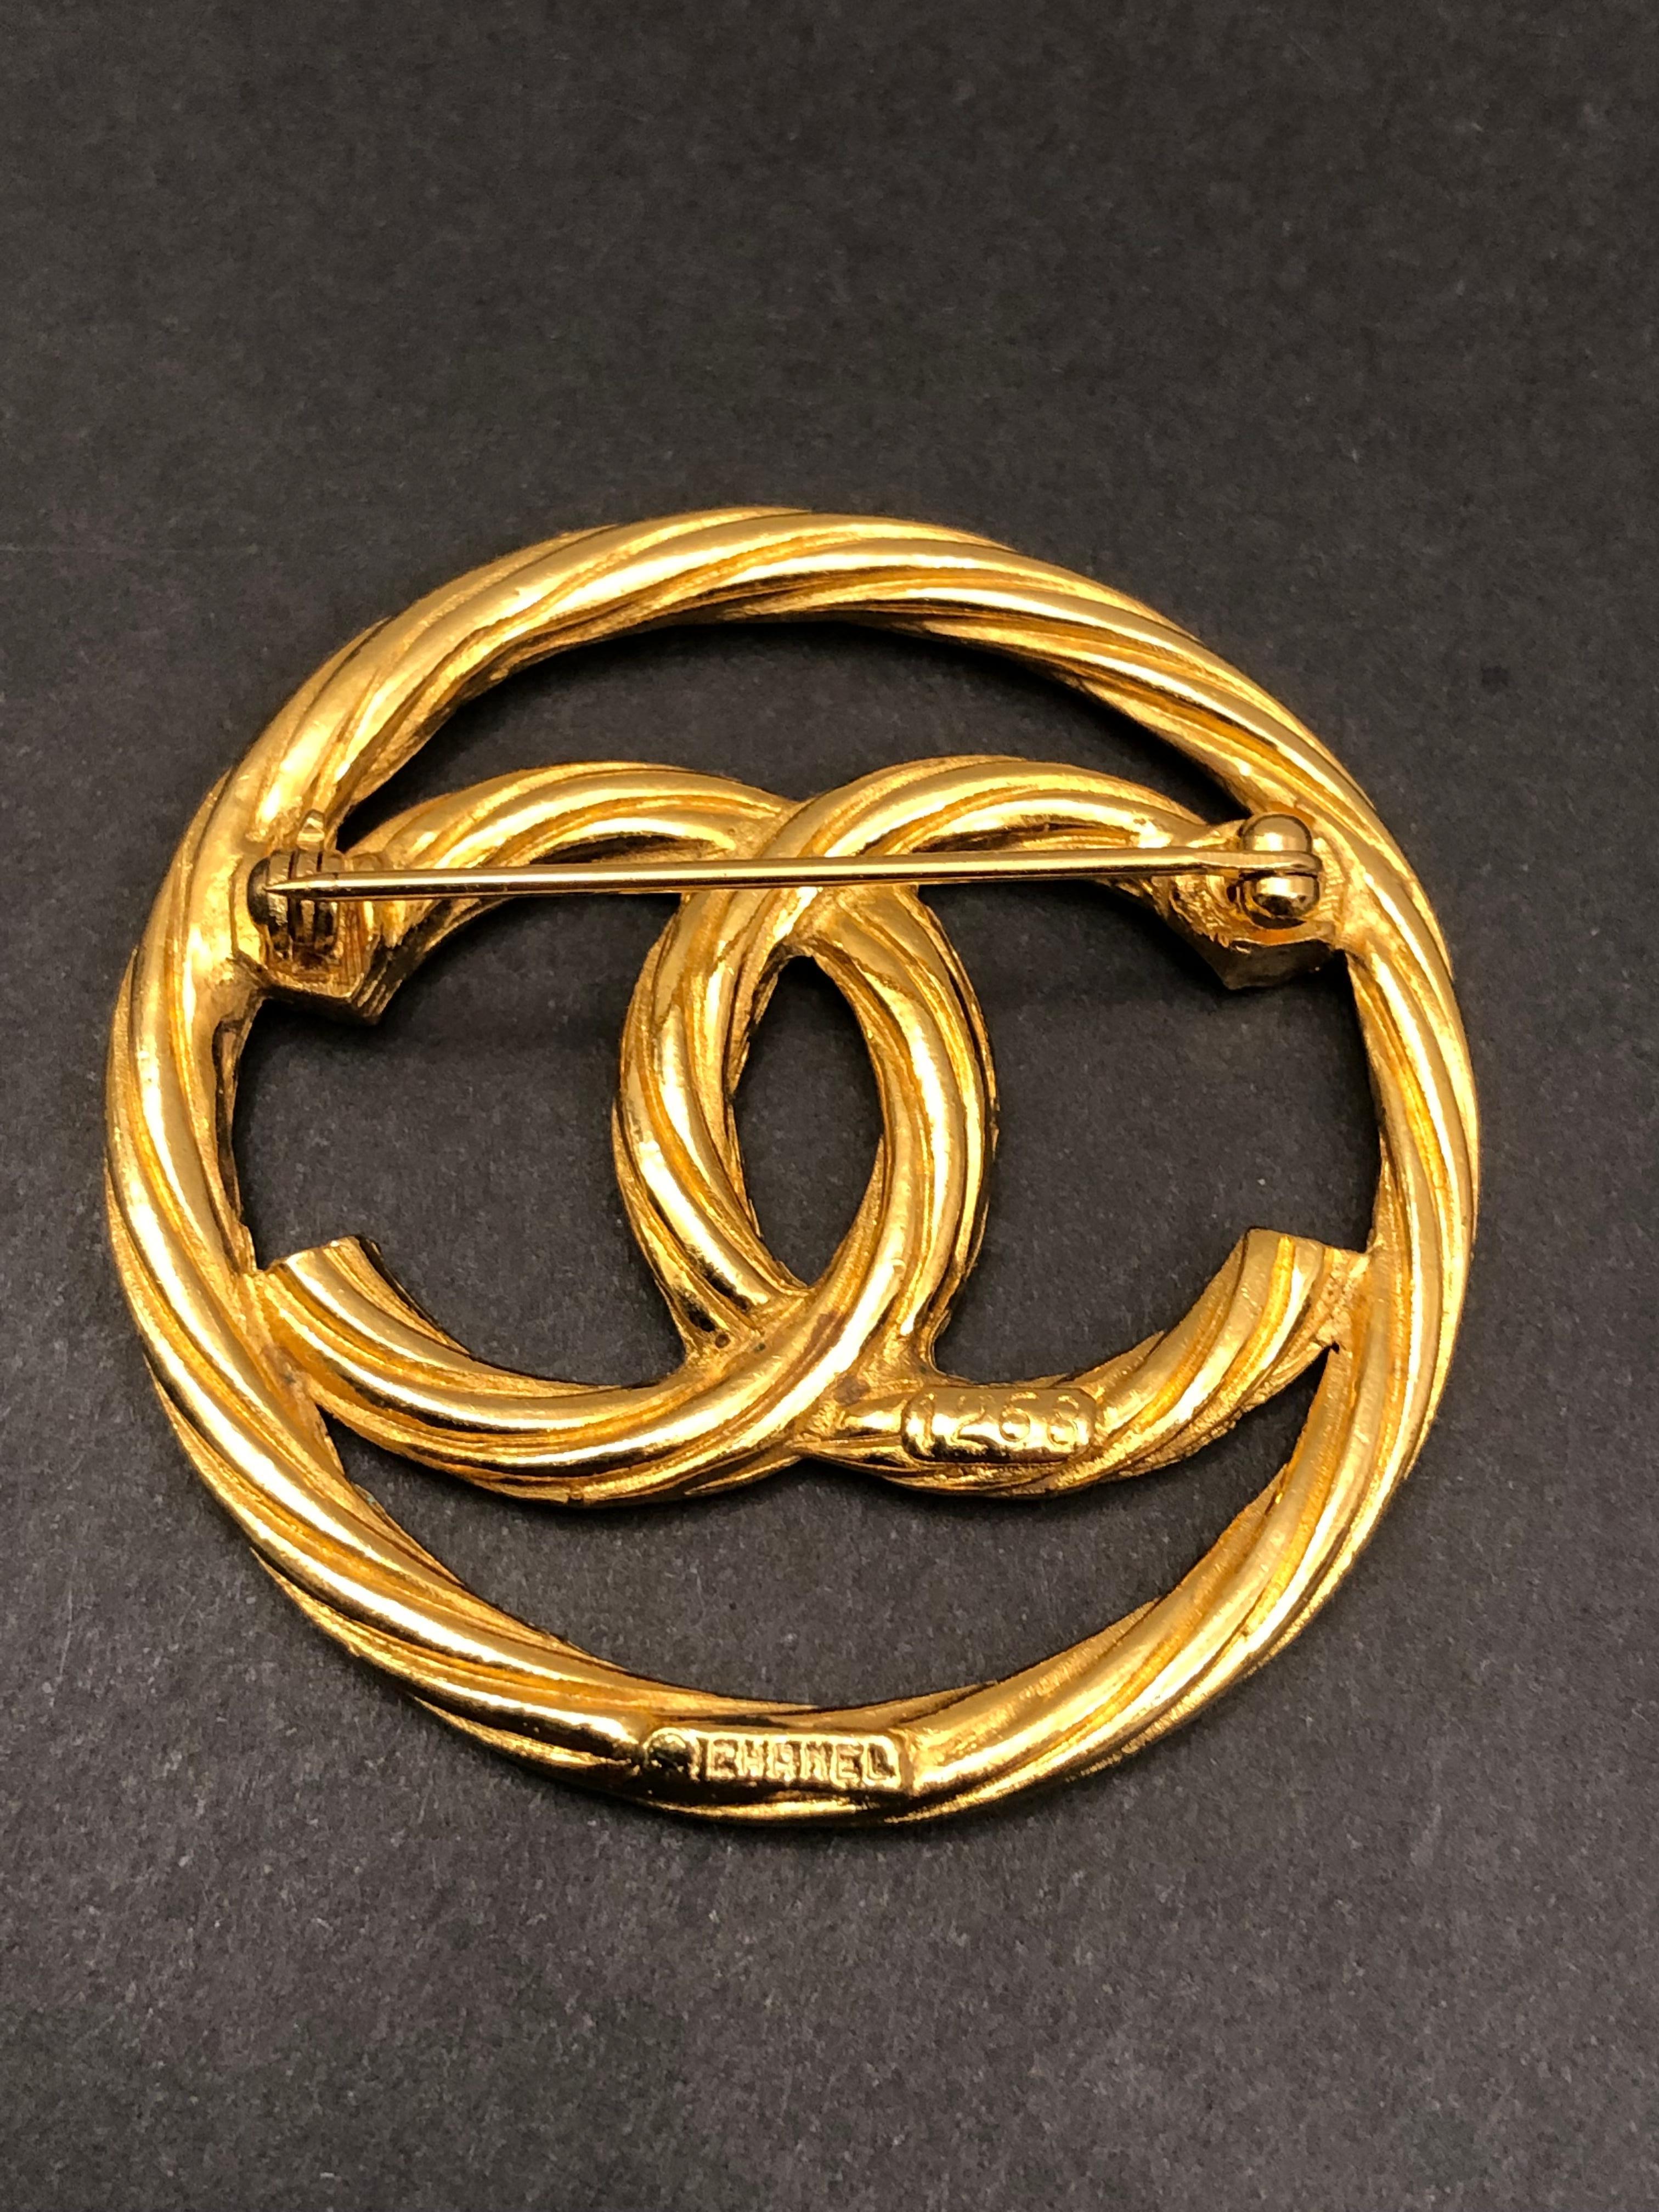 This vintage CHANEL gold toned brooch is crafted of gold plated metal in rope sling pattern featuring a CC logo. Stamped CHANEL 1268. Measures approximately 4.3 cm in diameter. Comes with box. 

Condition: Excellent vintage condition with minimal